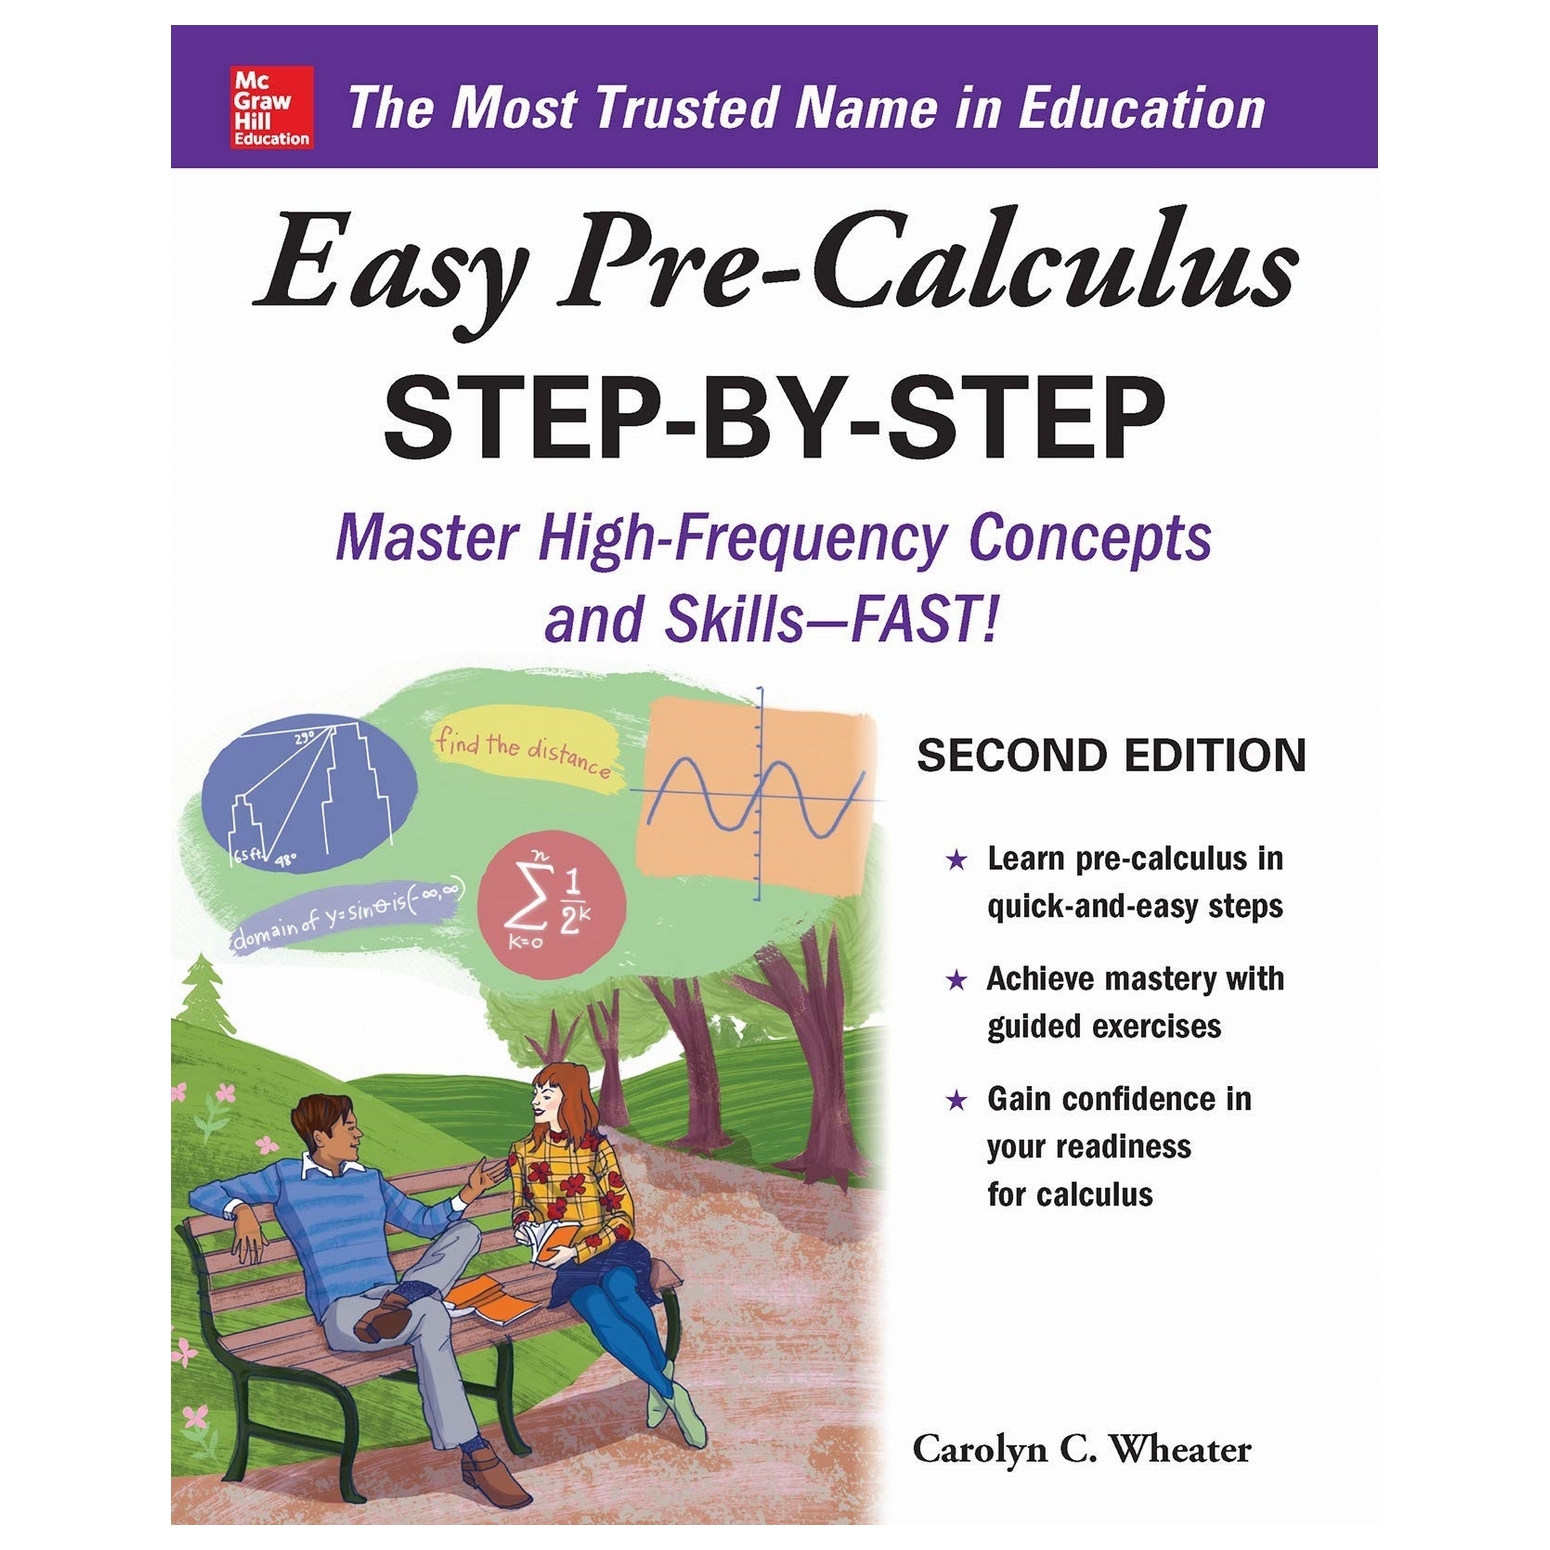 Easy Pre-Calculus Step-By-Step, Second Edition